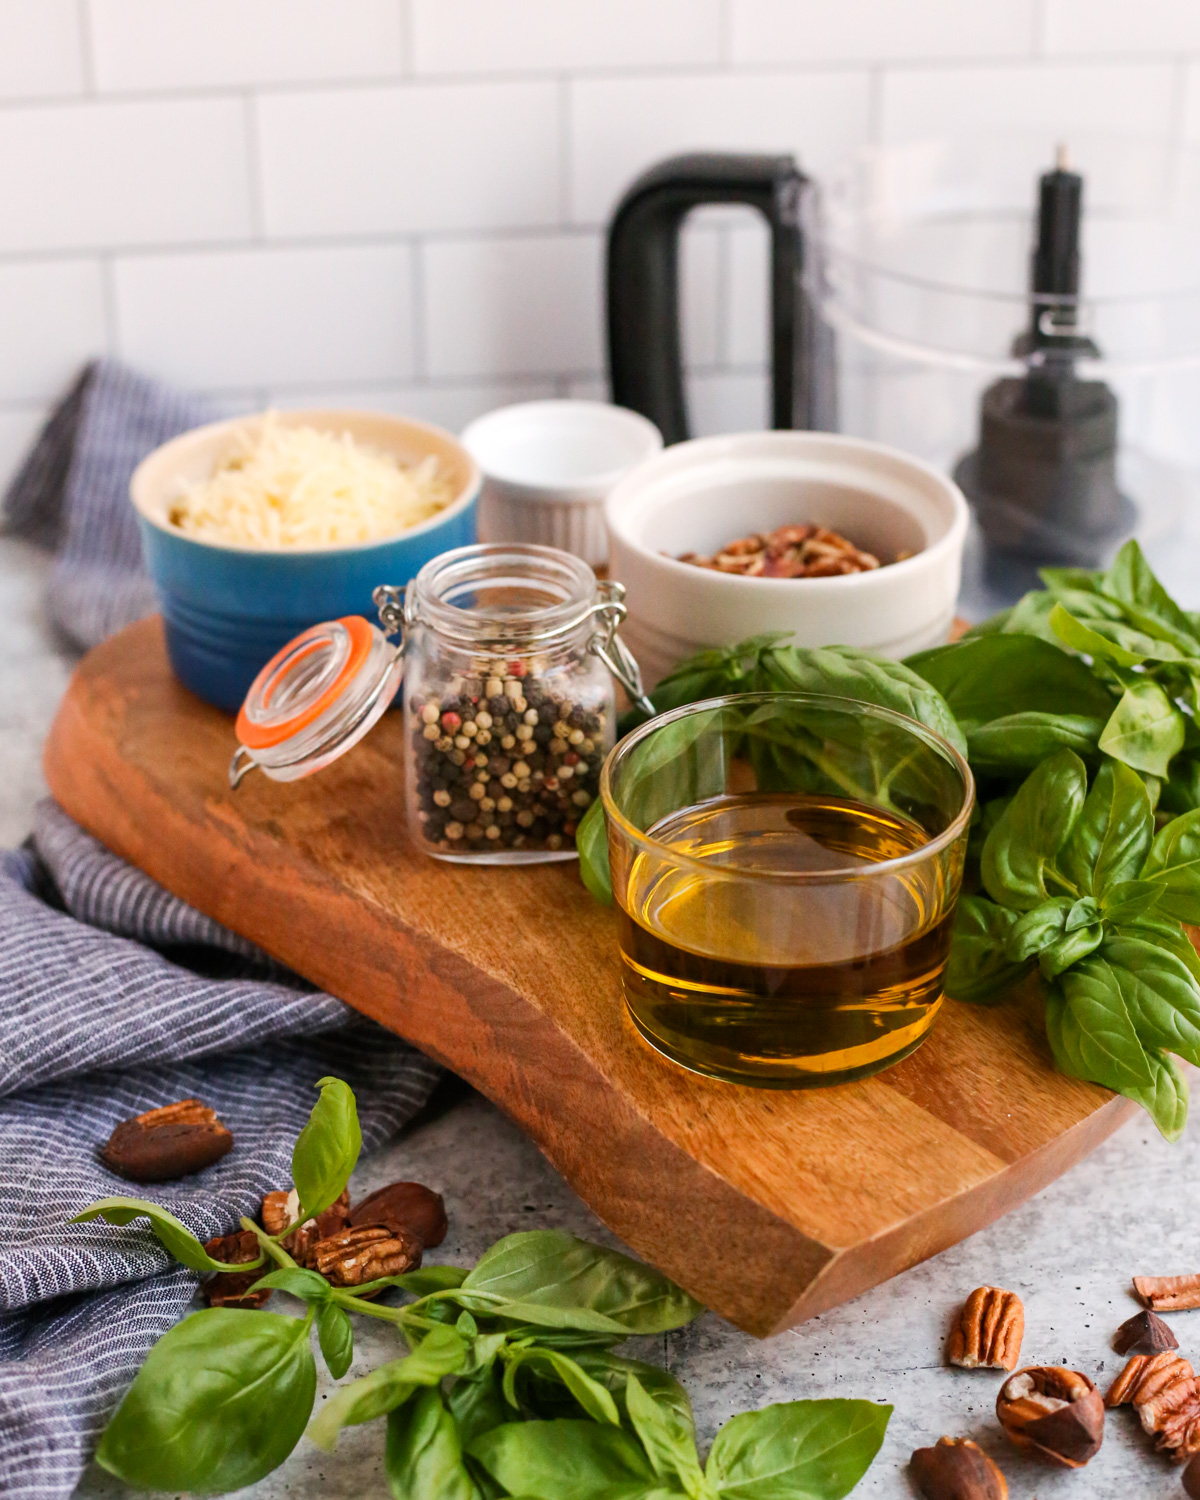 A wooden serving tray displays the ingredients needed for a homemade pesto without pine nuts, including olive oil, black pepper, parmesan cheese, salt and MSG, pecans, and fresh basil. The bowl of a food processor is visible in the background